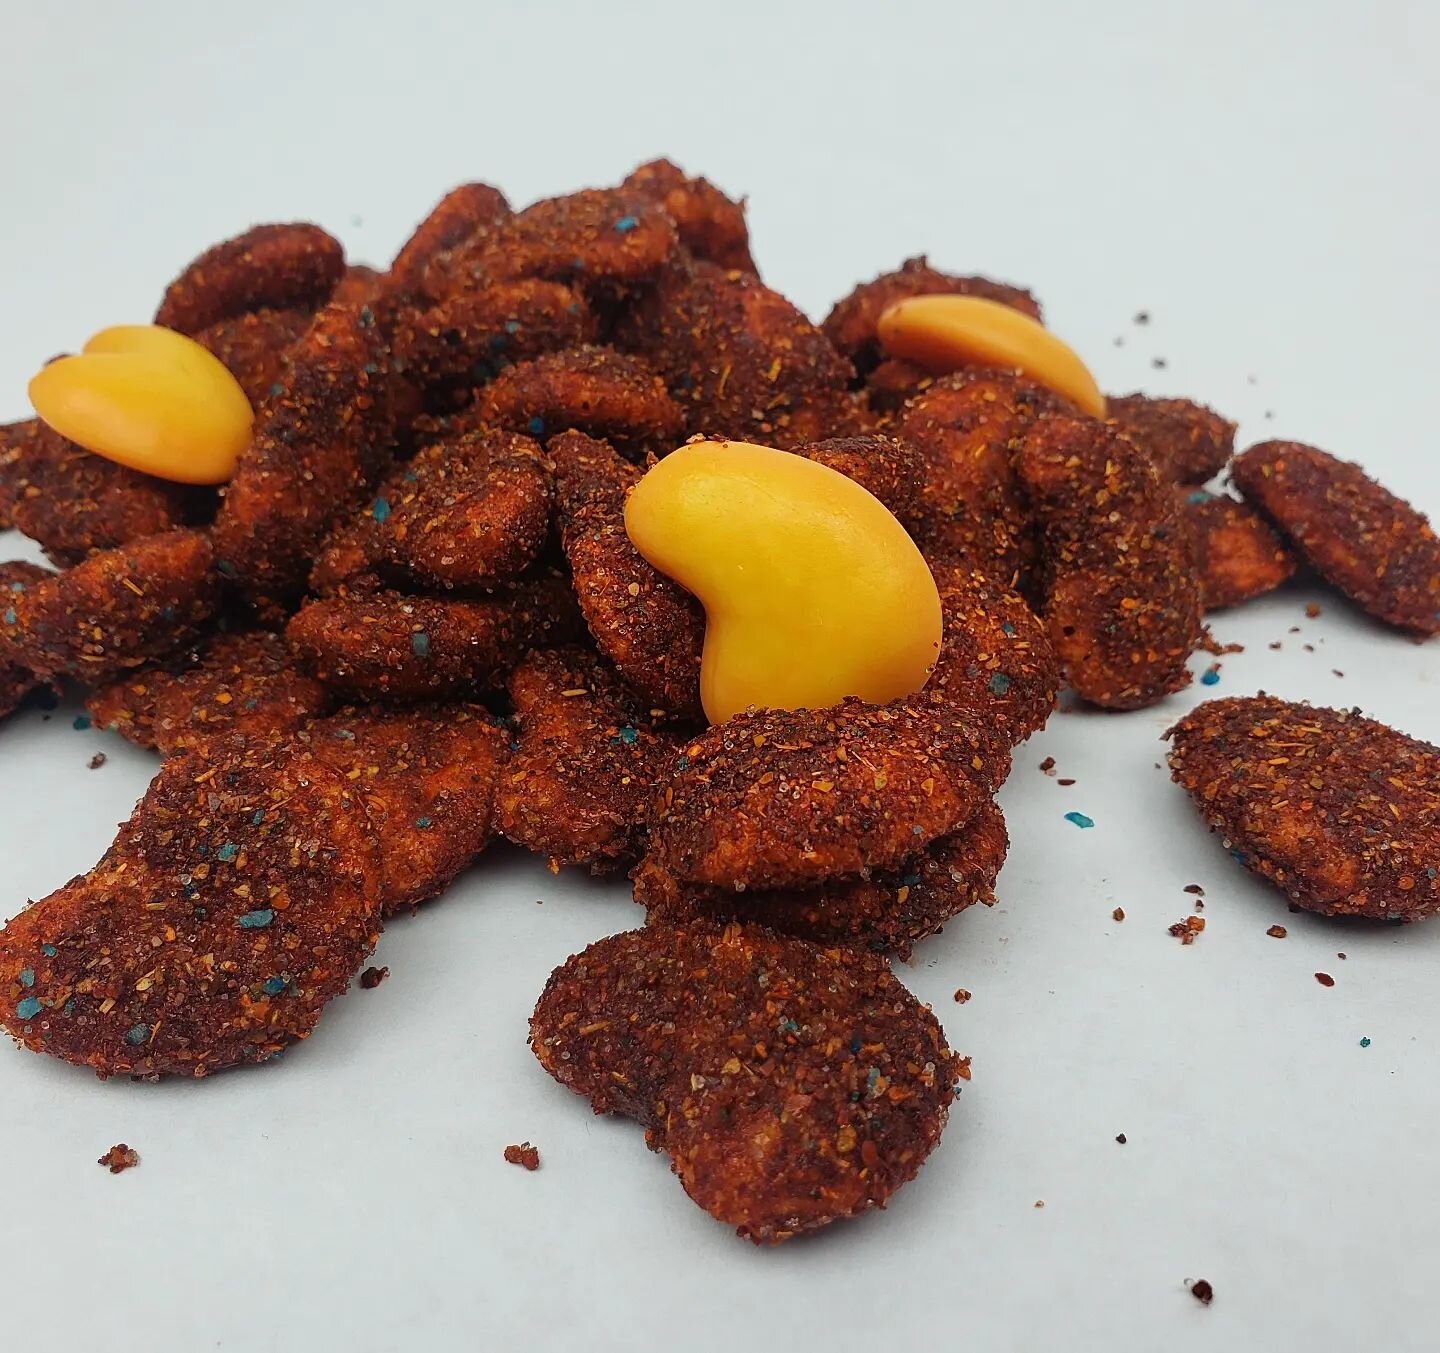 Manguitos has been a customer favorite since we added to our menu!! Check out our other items on https://www.chamyjam.com/

#chamoycandies #manguitos #chamoylovers #chamoy #dulcesenchilados #chamyjam #chamyjamcandy #gummies #sweetsandtreats #chamoygu